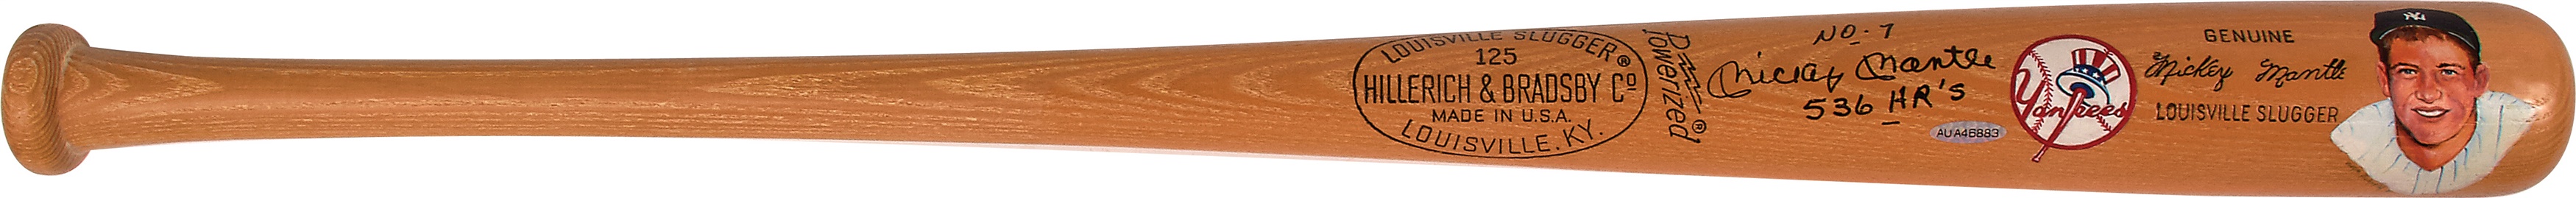 Mickey Mantle Signed Bat with Hand Painted Portrait